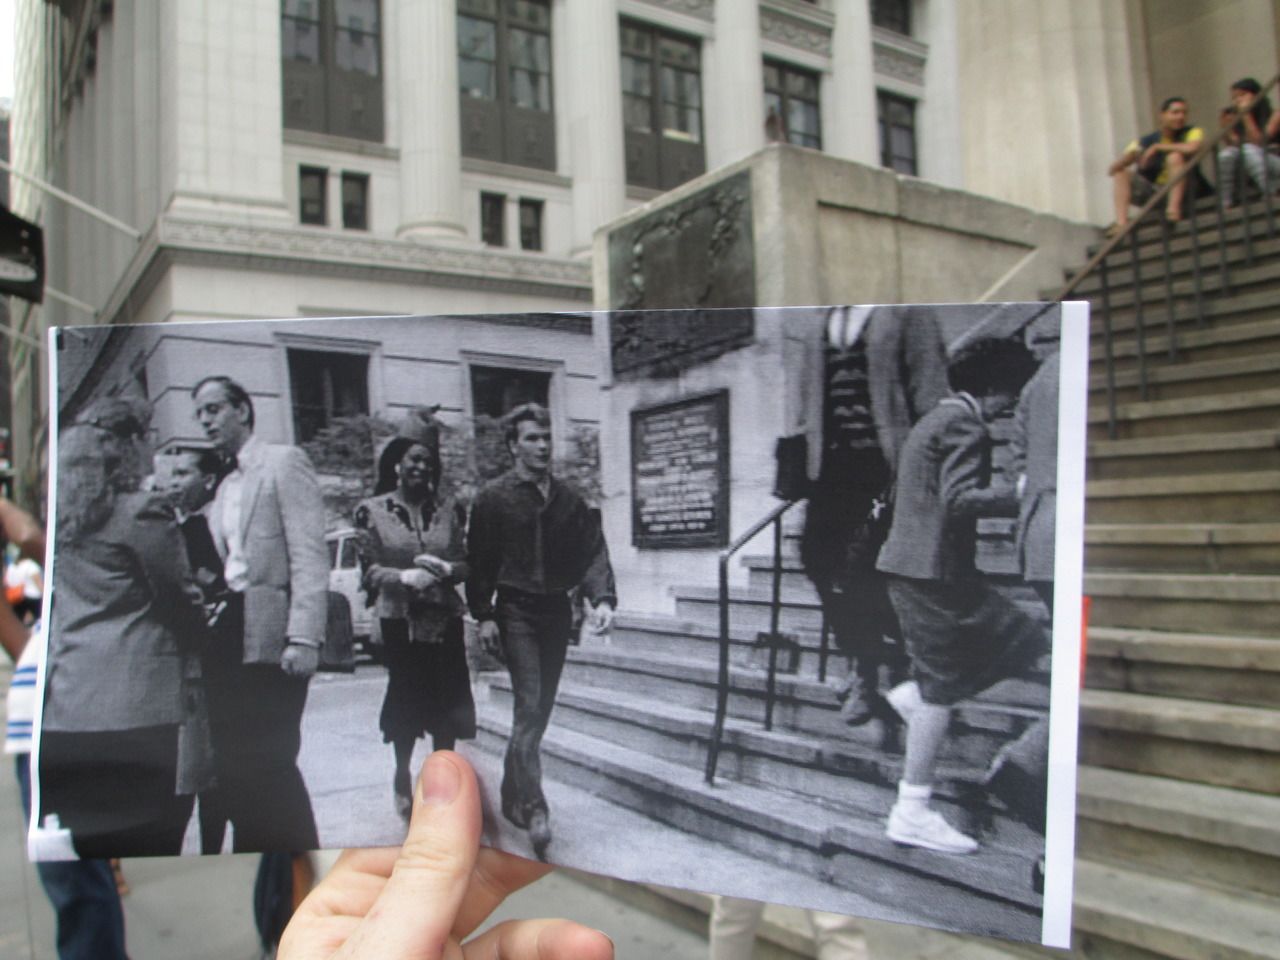 In "Ghost," the recently deceased Sam Wheat (Patrick Swayze) and his psychic friend Oda Mae Brown (Whoopi Goldberg) make their way along Wall Street on the way to the bank. En route, they pass Federal Hall, a New York movie staple, which has appeared in "On the Town" and "The 10th Victim" and as the backdrop of the battle scene in "The Dark Knight Rises."